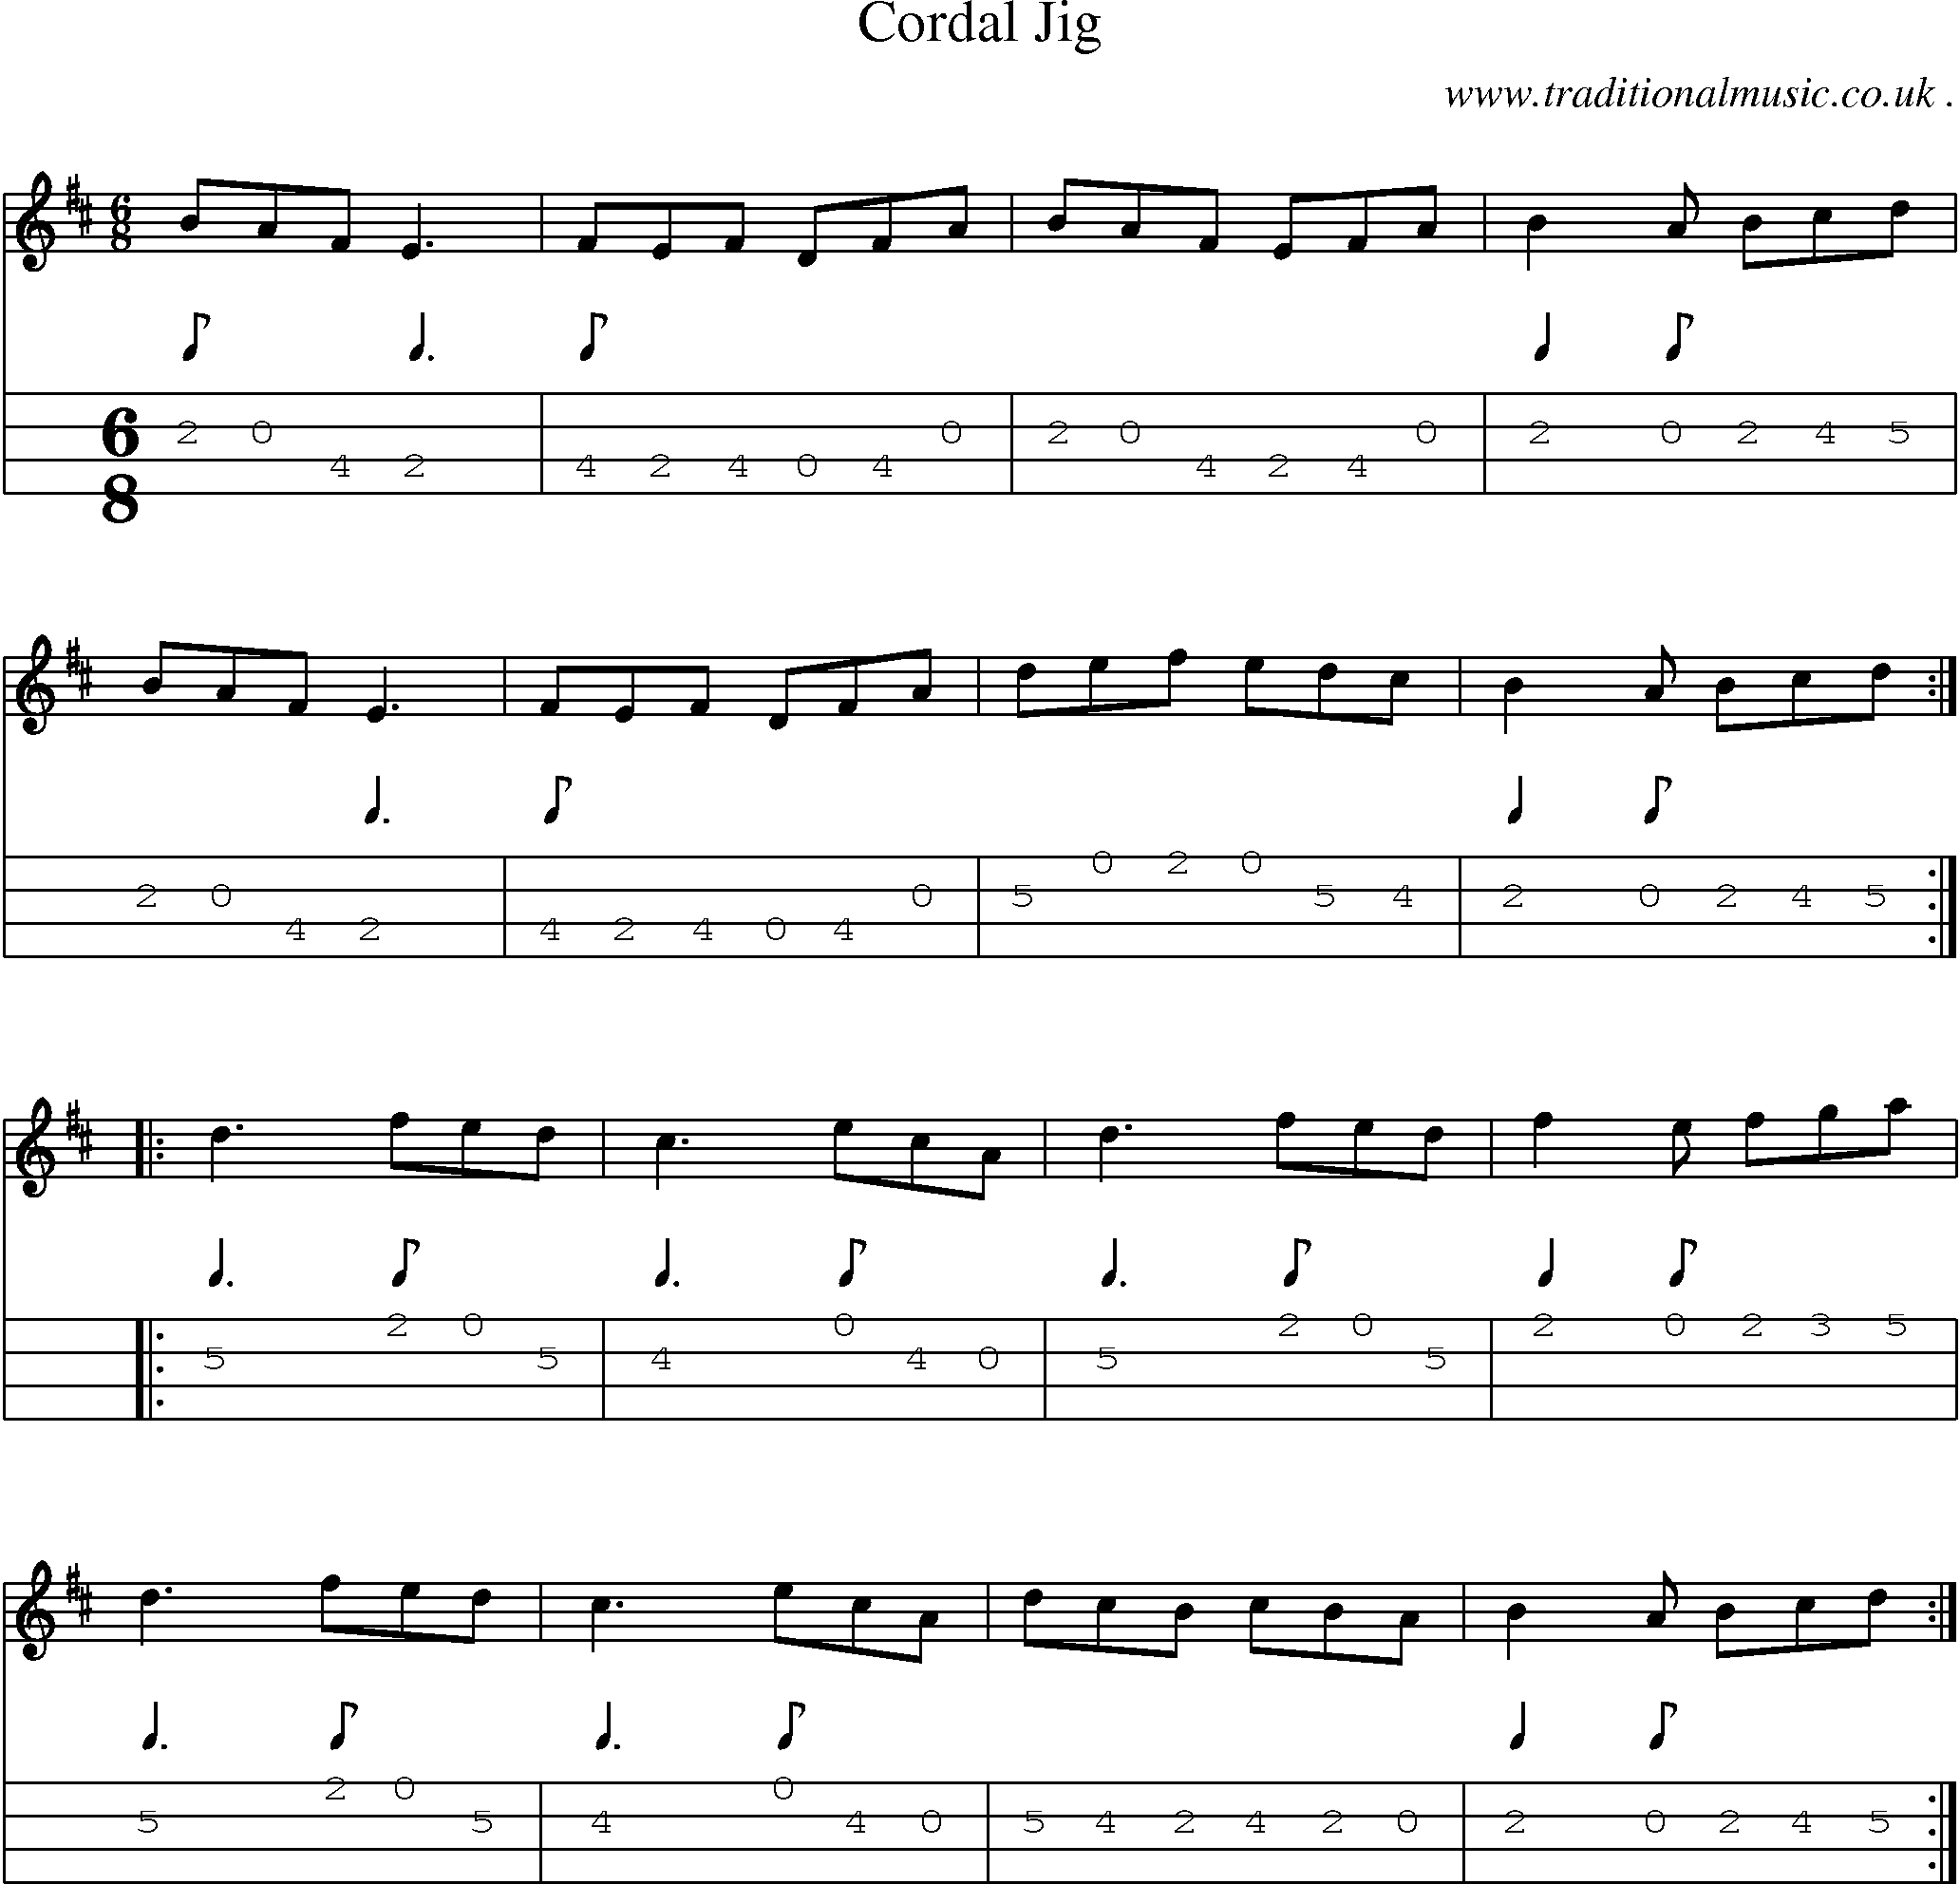 Sheet-Music and Mandolin Tabs for Cordal Jig